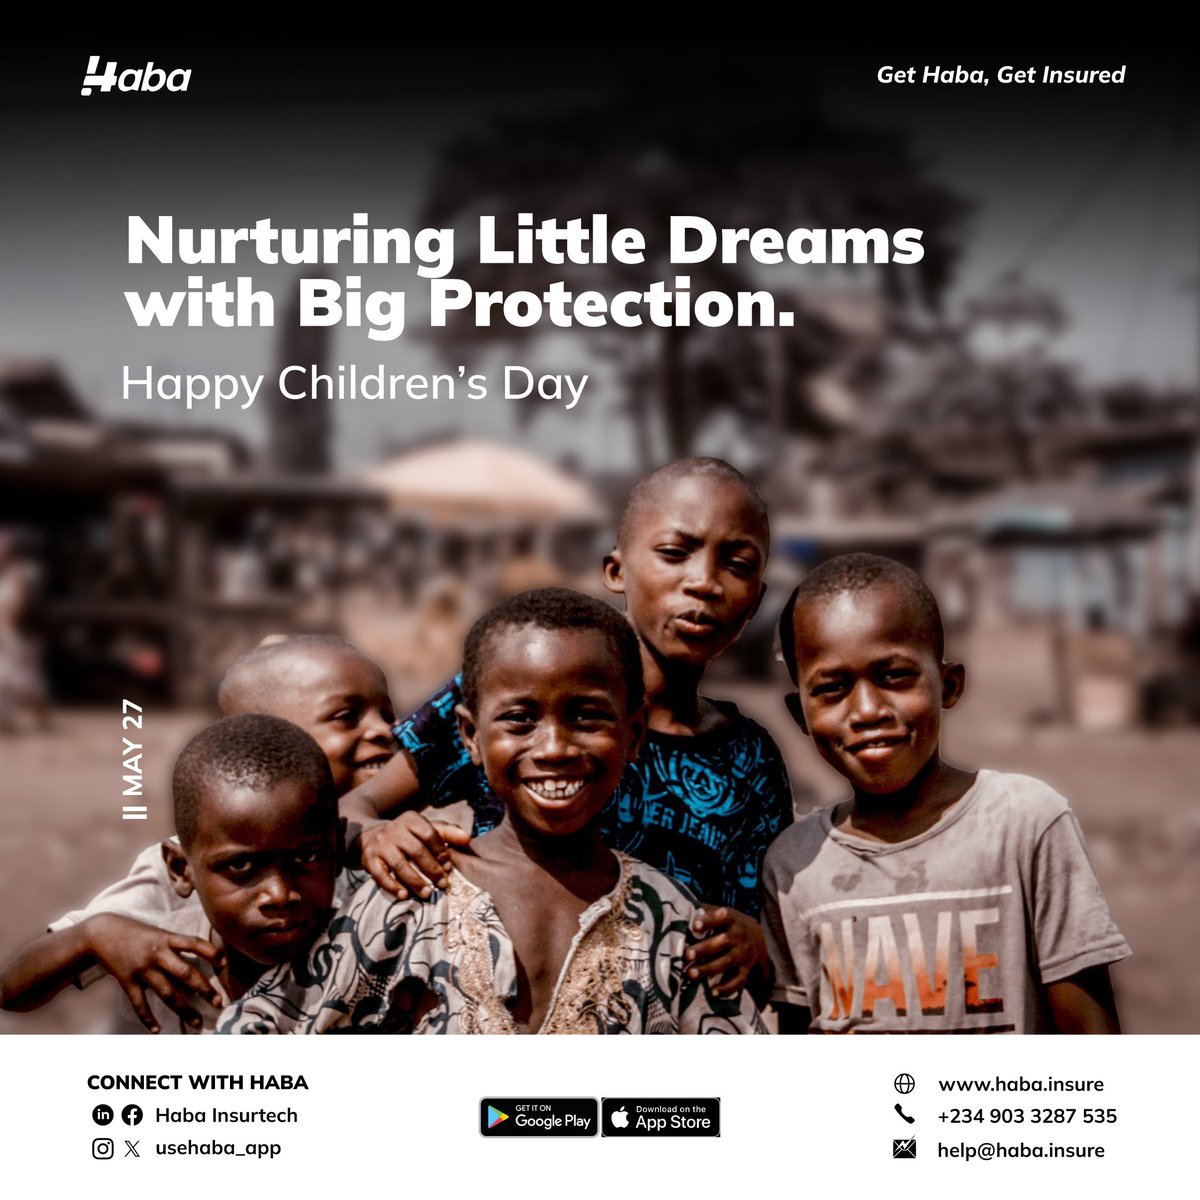 Nurturing Little Dreams with Big Protection. Happy Children's Day!

#healthinsurance #insurance #travelinsurance #AutoInsurance #autoinsurance #insure #Insurance #hmo #claimsprocessing

Miss Pepeye|| Uniben|| Naira|| Chelsea